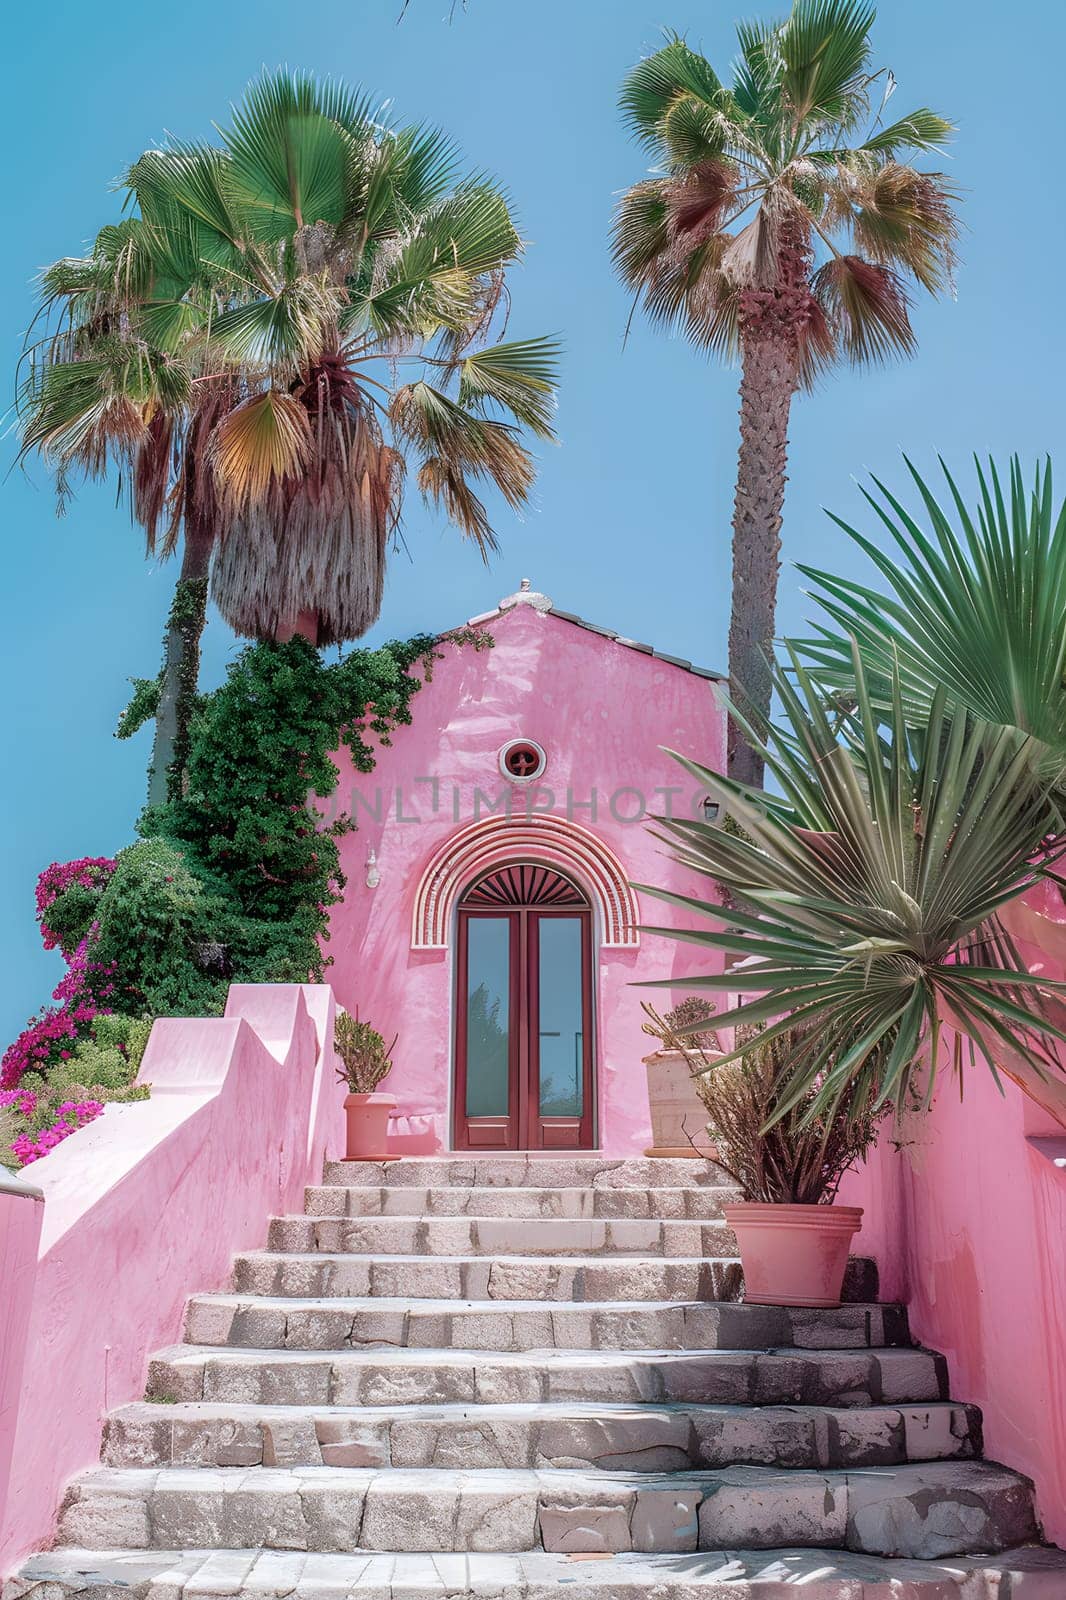 Palm trees frame a pink building with stairs leading up to a symmetrical facade by Nadtochiy